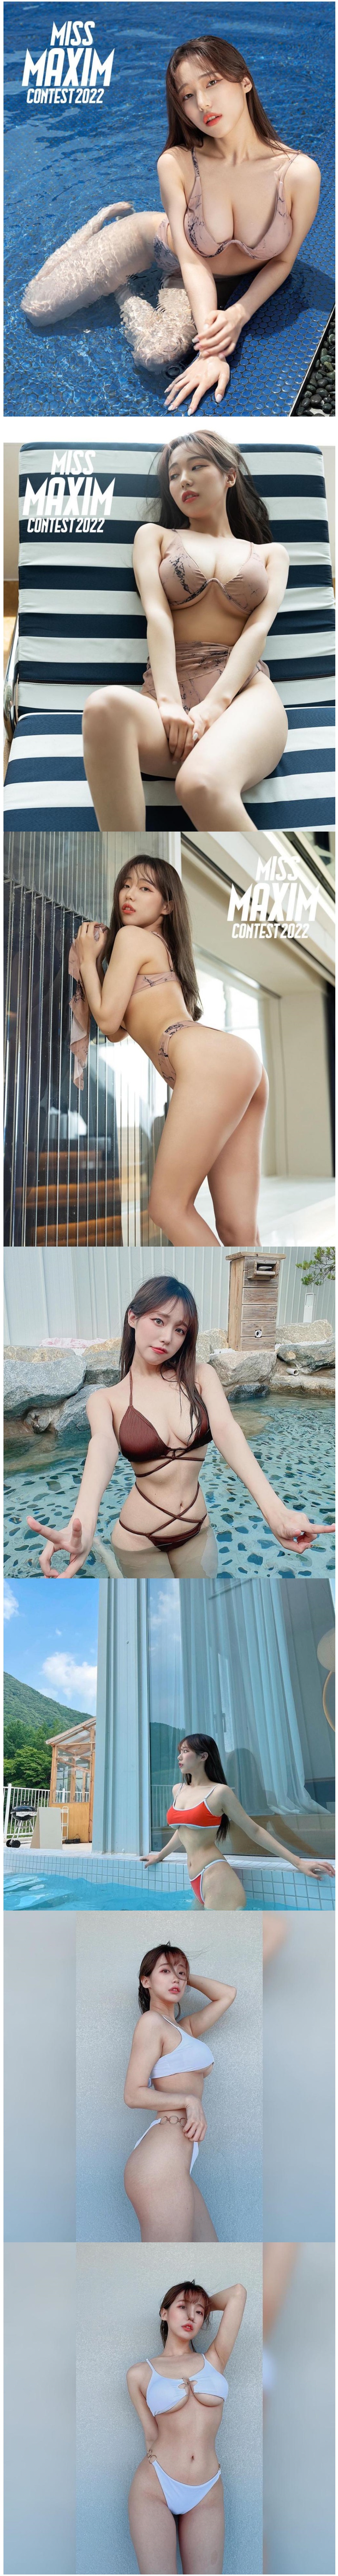 First place in the Miss Maxim contest, KYUNG